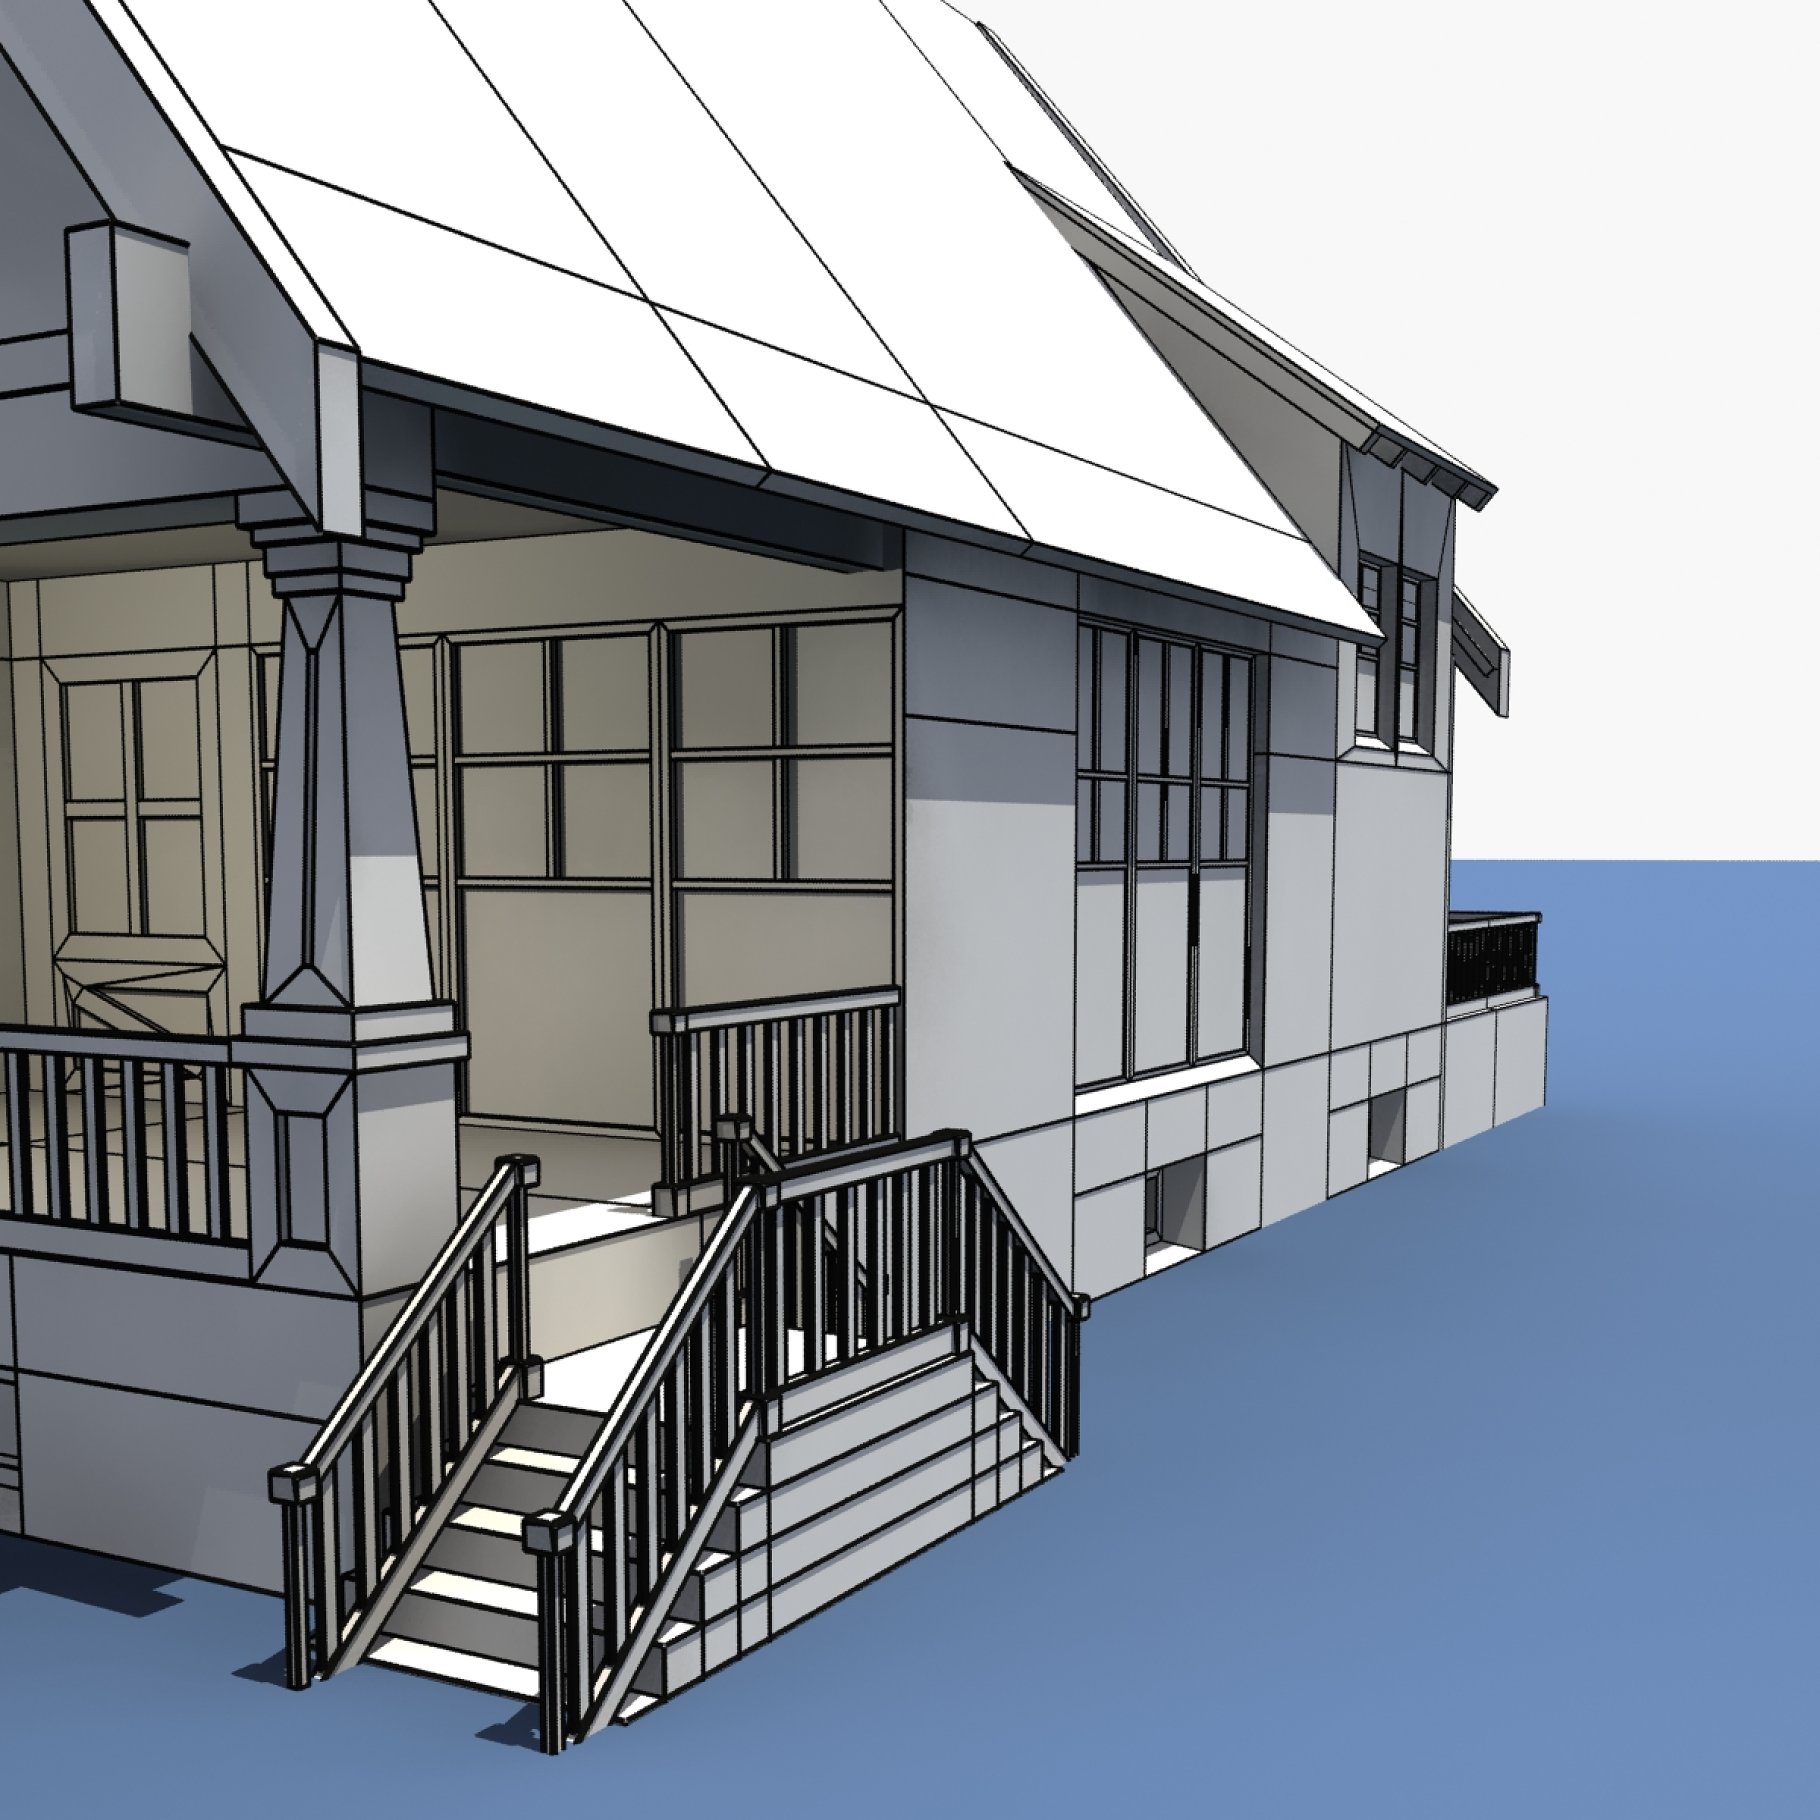 Graphic mockup of low poly house in close-up on a white and blue background.